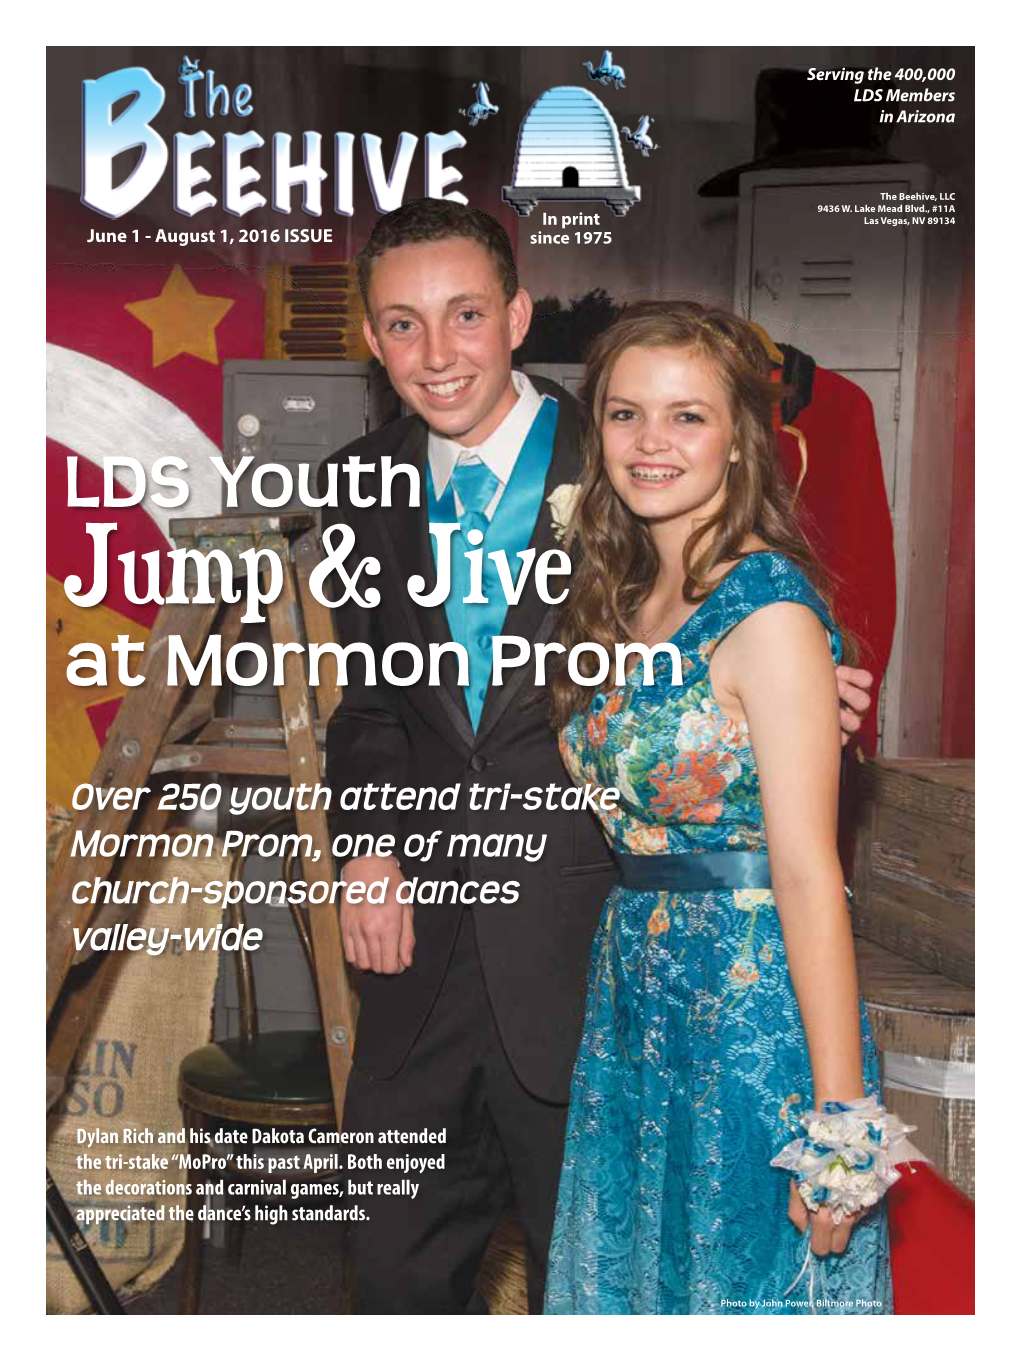 LDS Youth at Mormon Prom